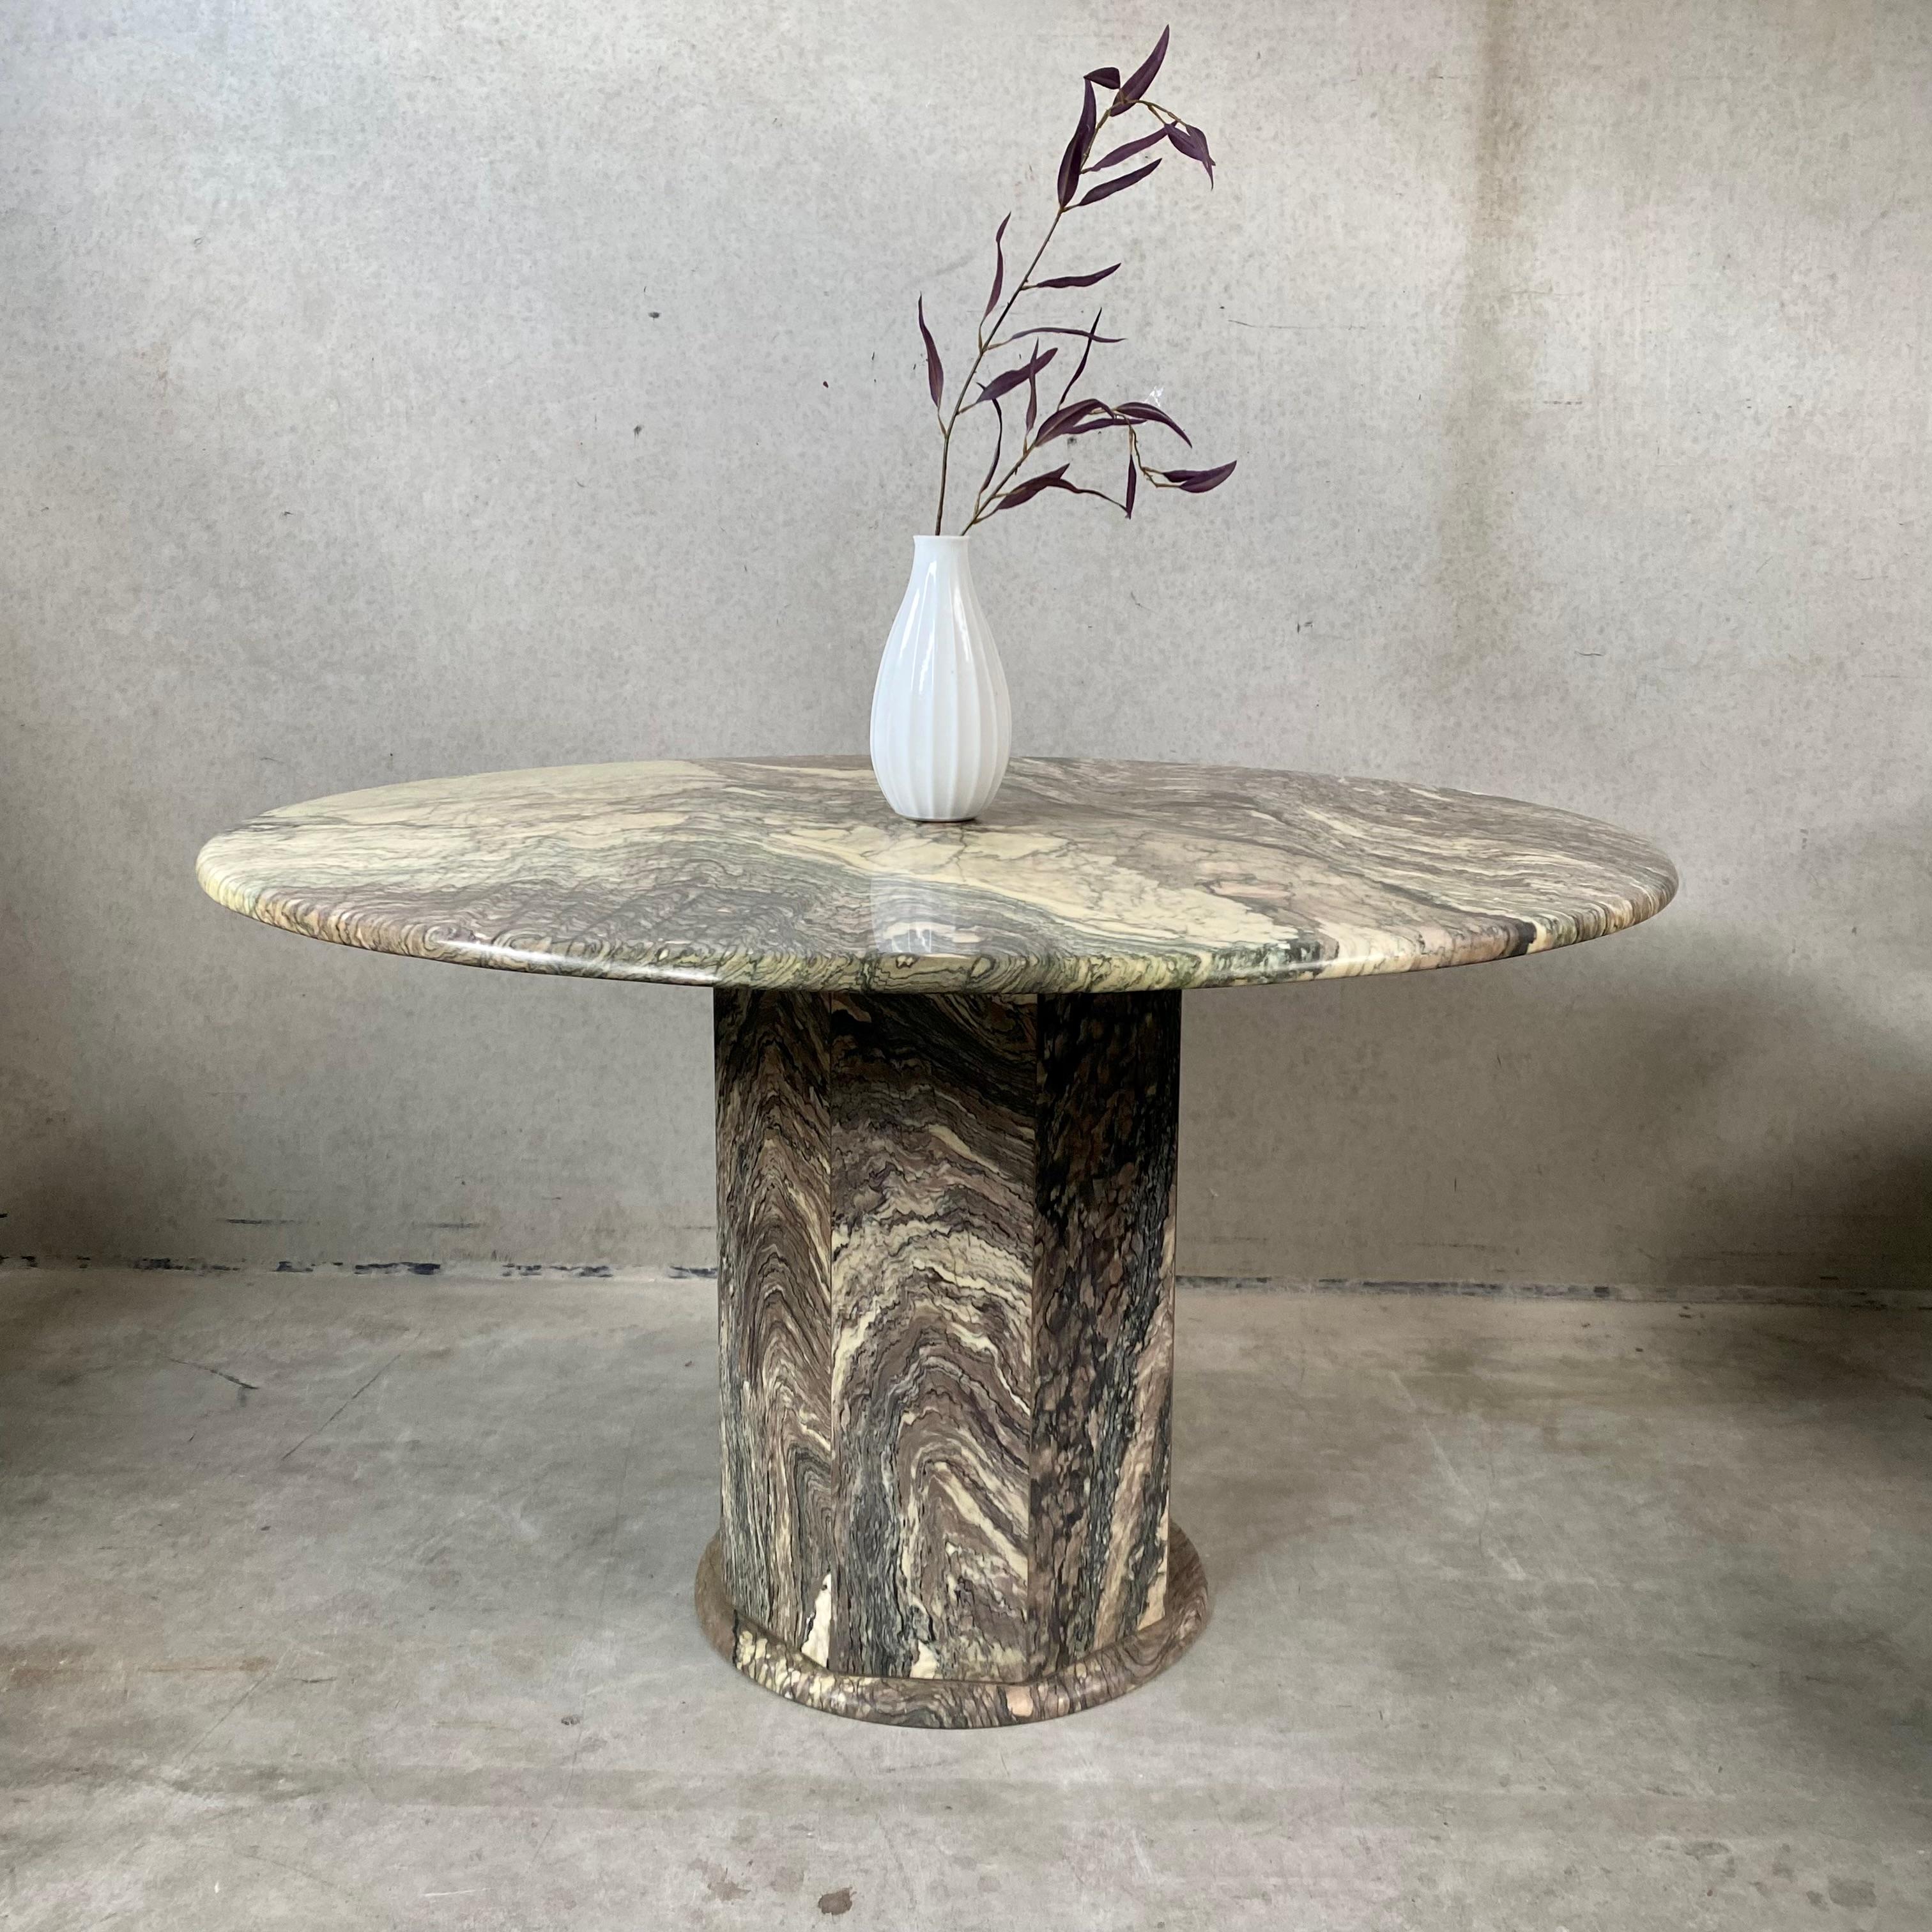 Introducing the Exquisite Vintage Cipollino Marble Round Dining Table - Italian Design 1980

Enhance your dining space with timeless elegance through our captivating Vintage Cipollino Marble Round Dining Table. This exquisite piece, hailing from the